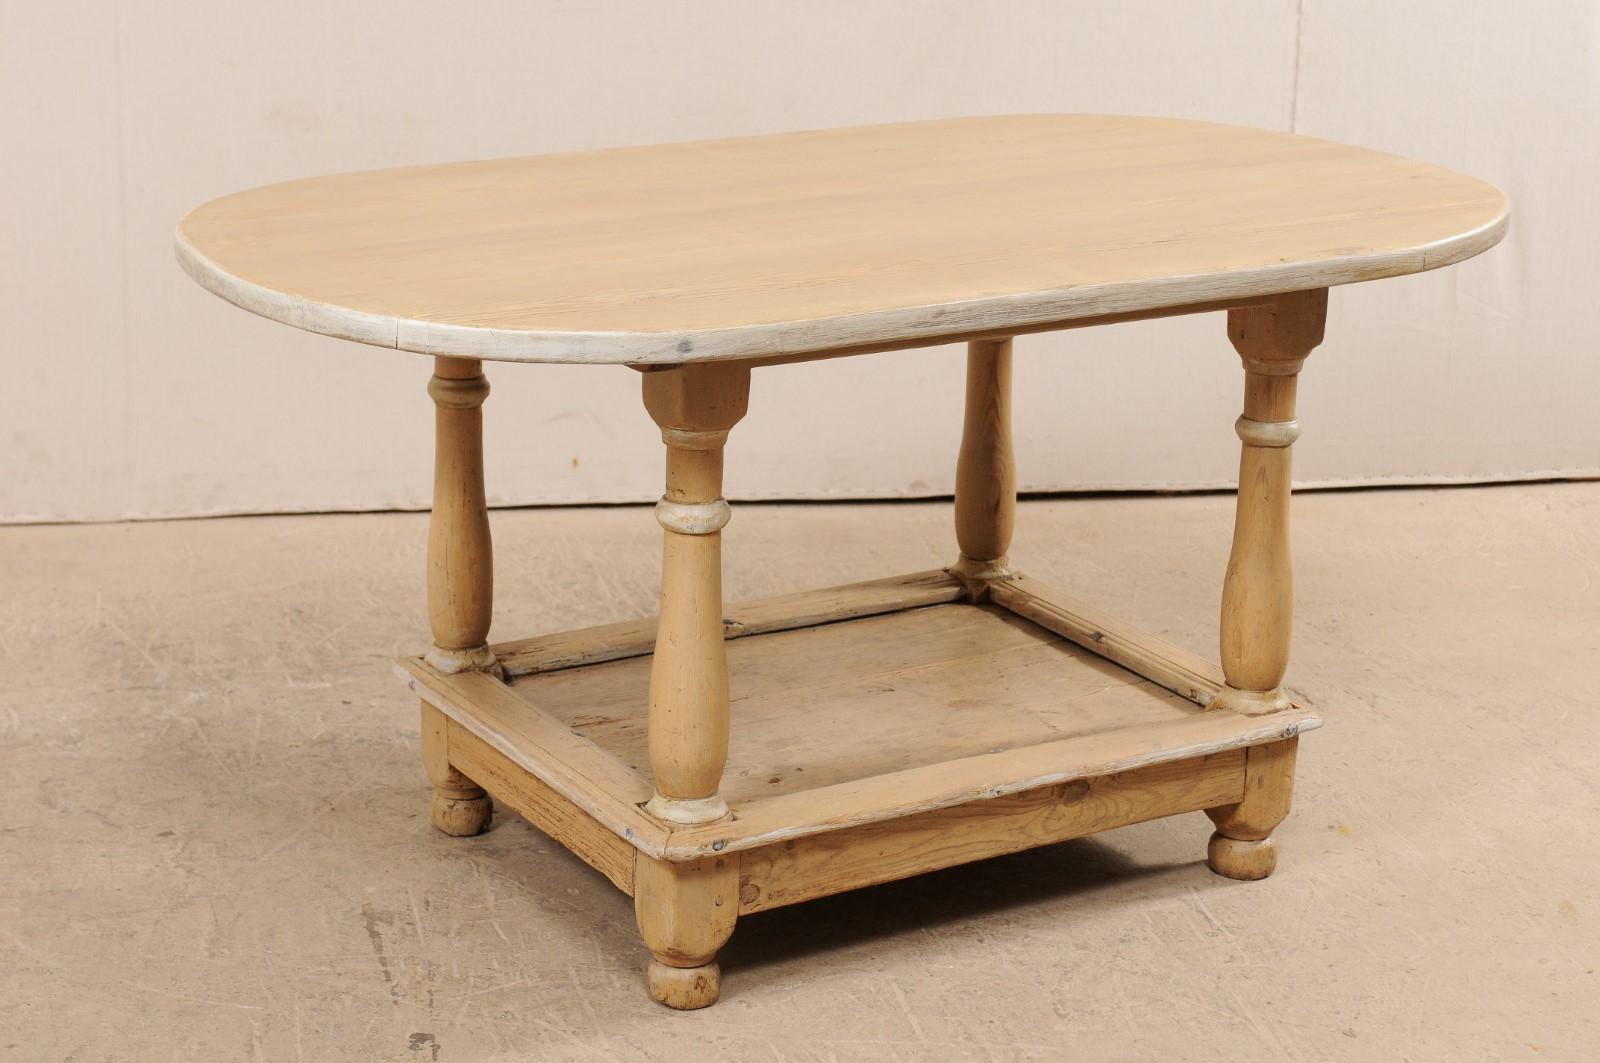 An Early 19th Century Swedish Bleached & Painted Wood Two-Tier Oval Table In Good Condition For Sale In Atlanta, GA